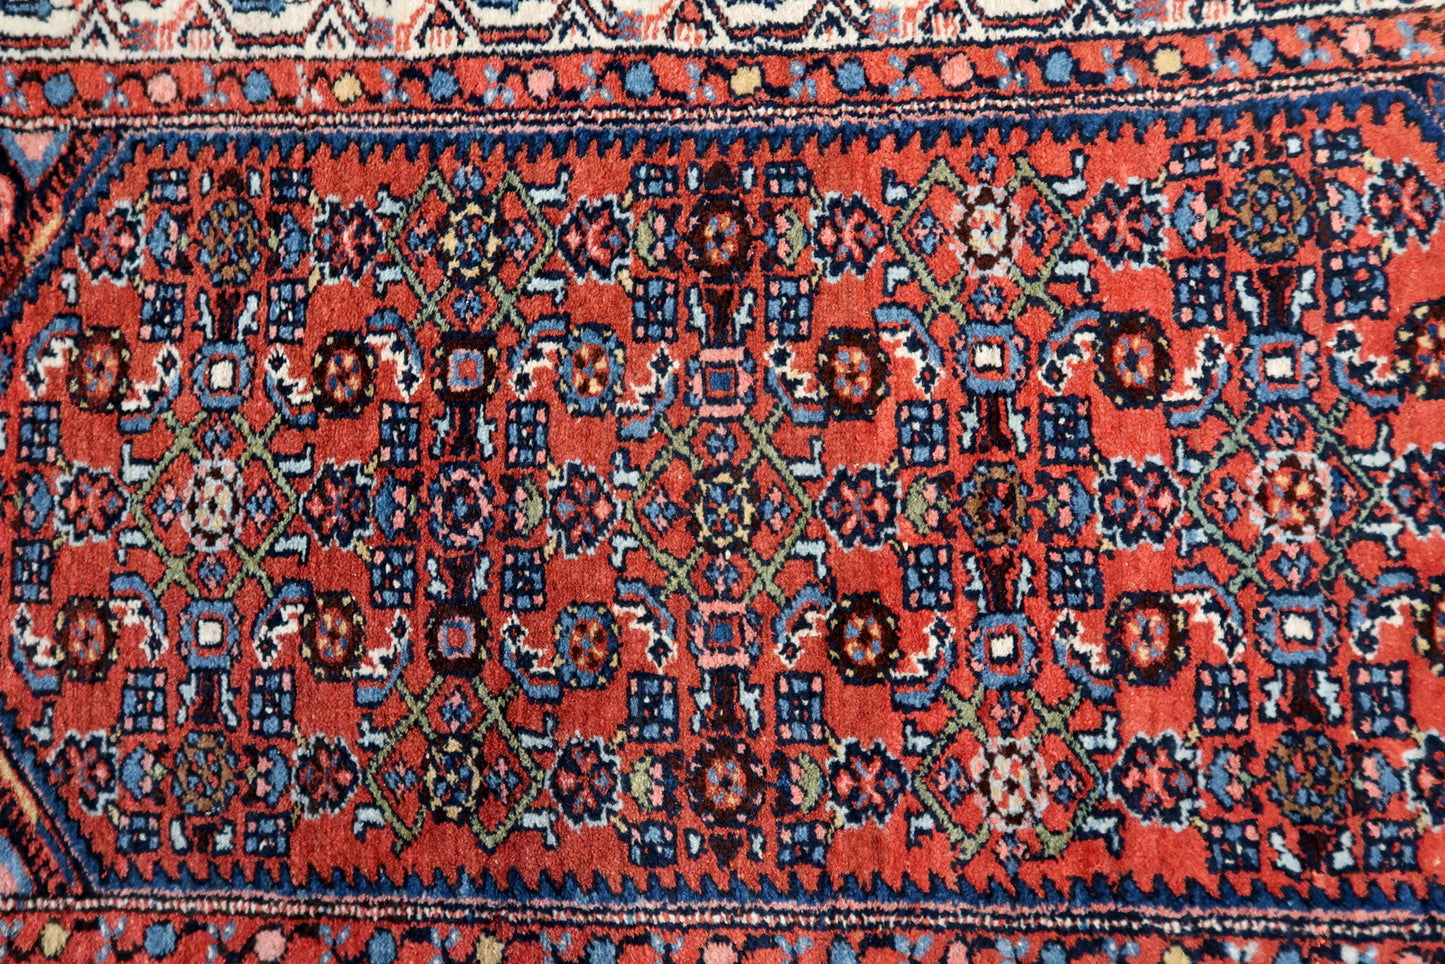 Close-up of the intricate motifs woven into the rug's design